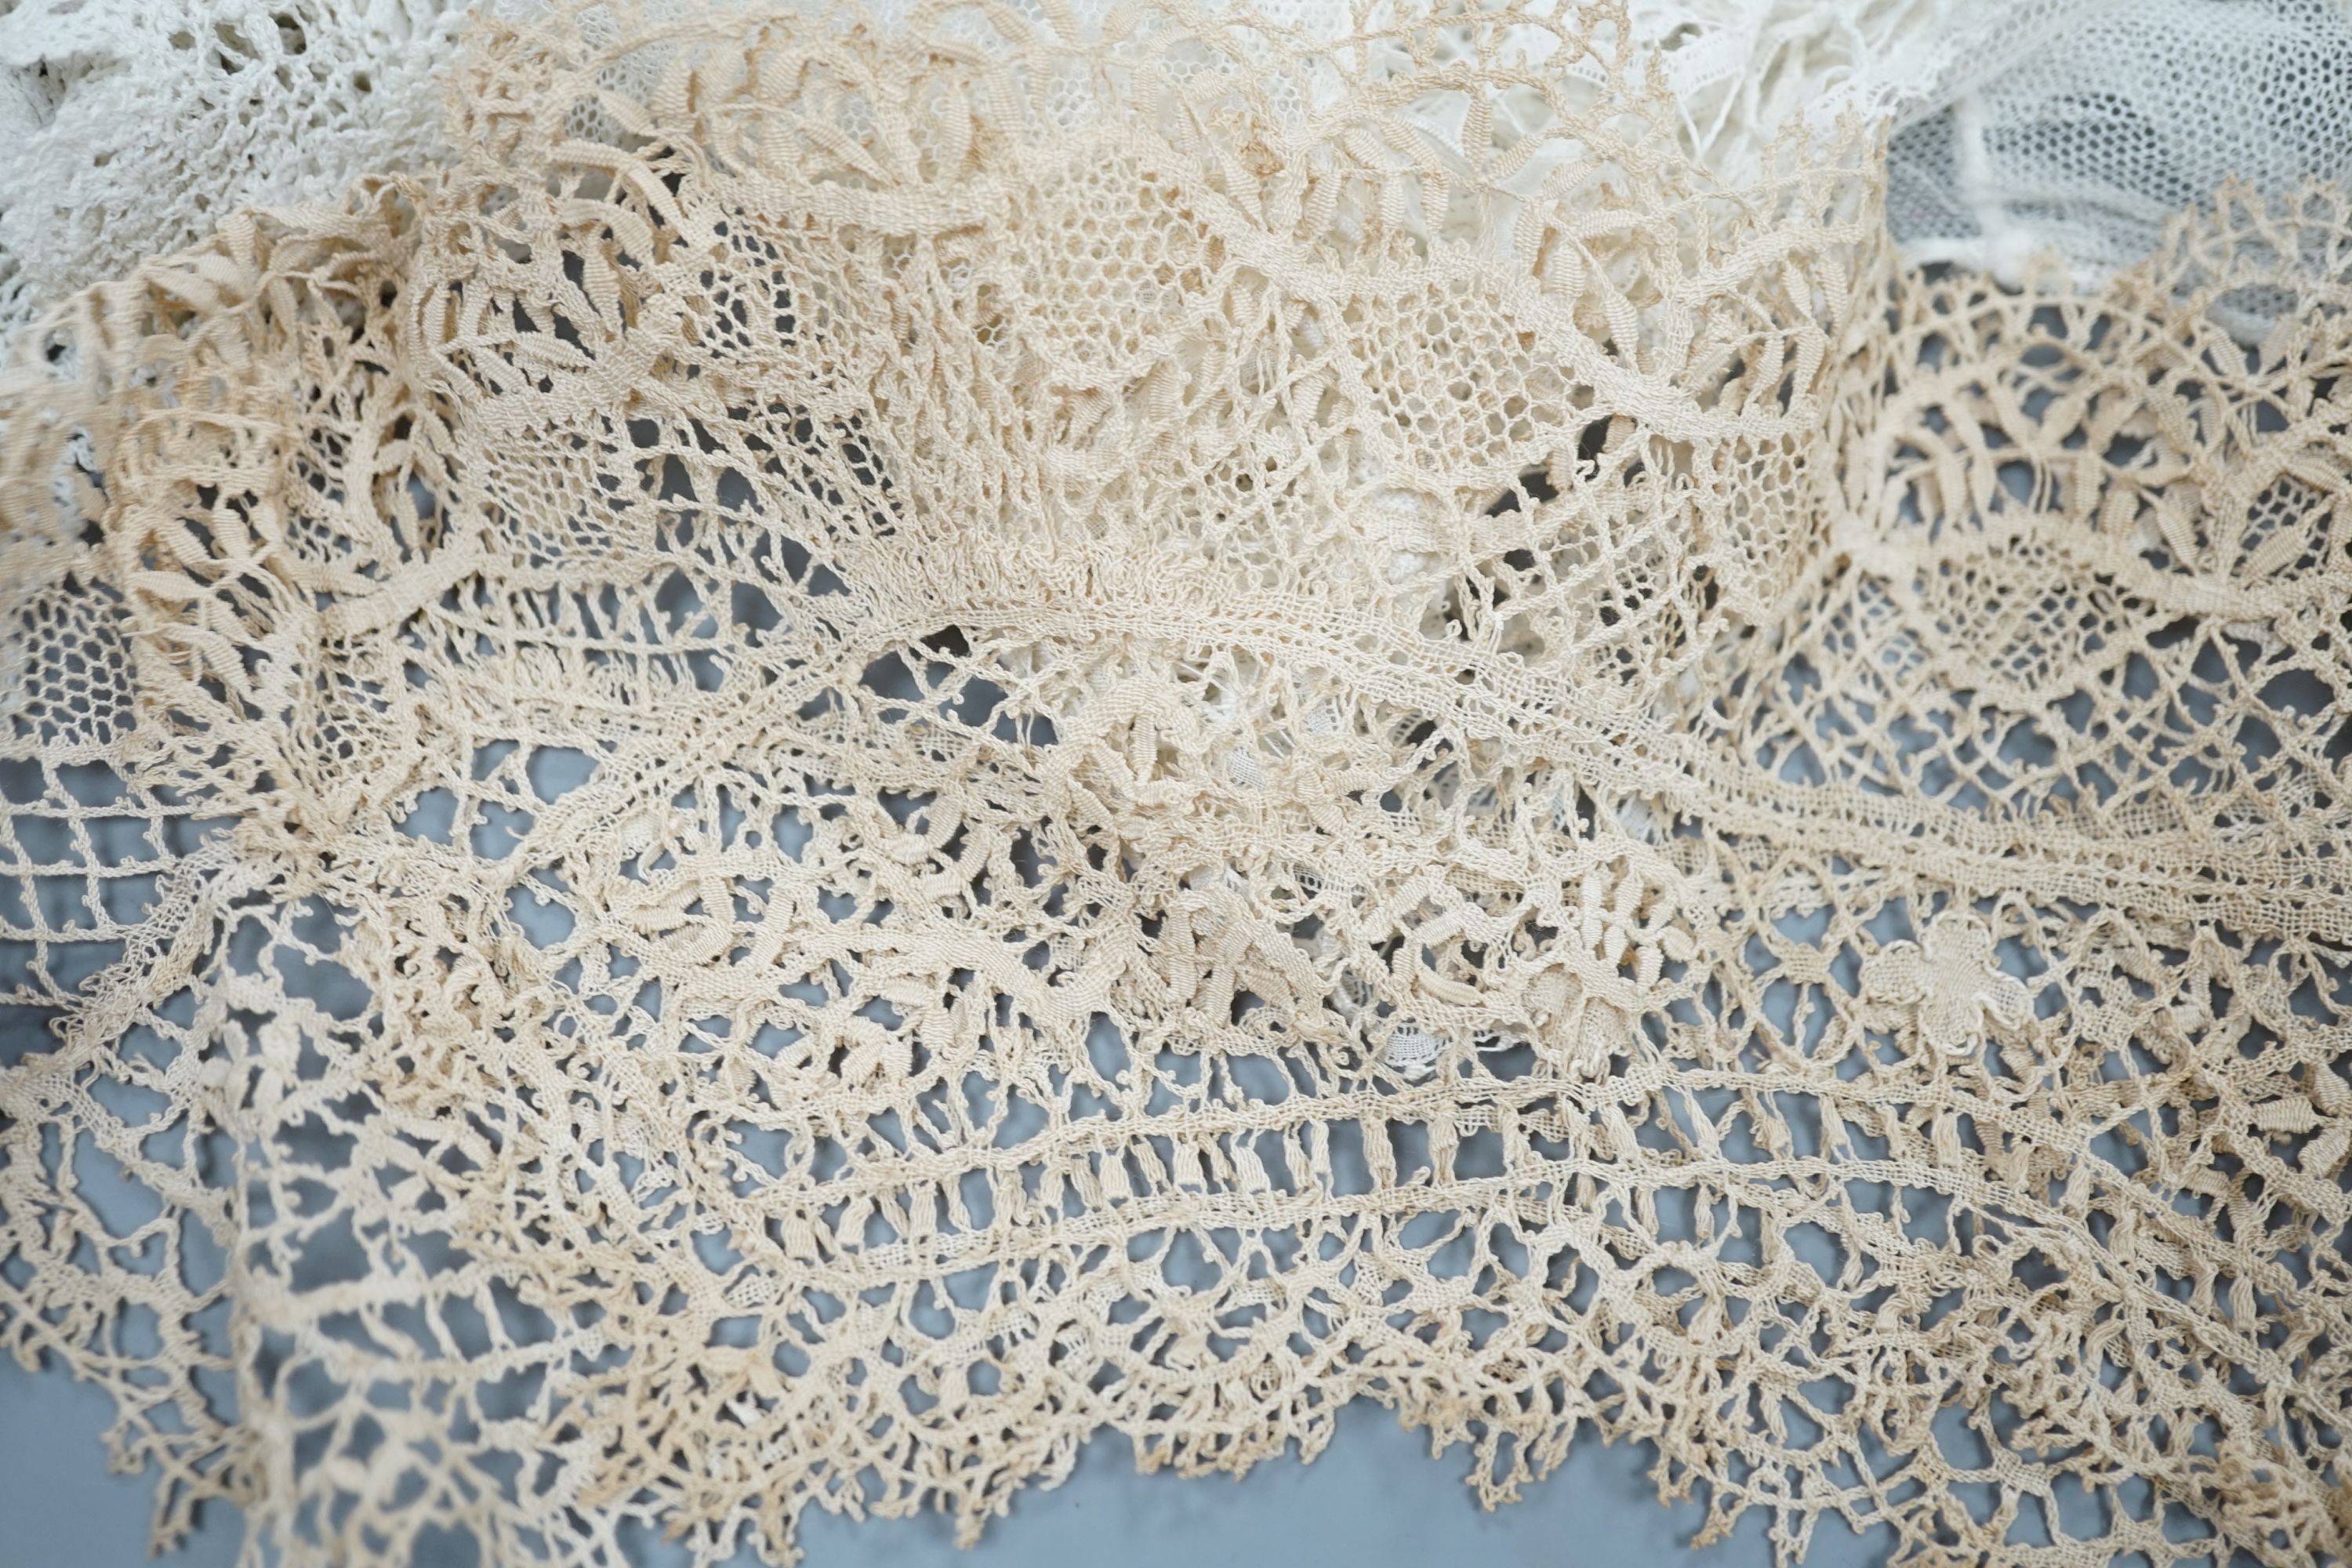 A collection of 19th century hand made bobbin lace and other handmade collars and trimmings, including Honiton, Irish crochet.